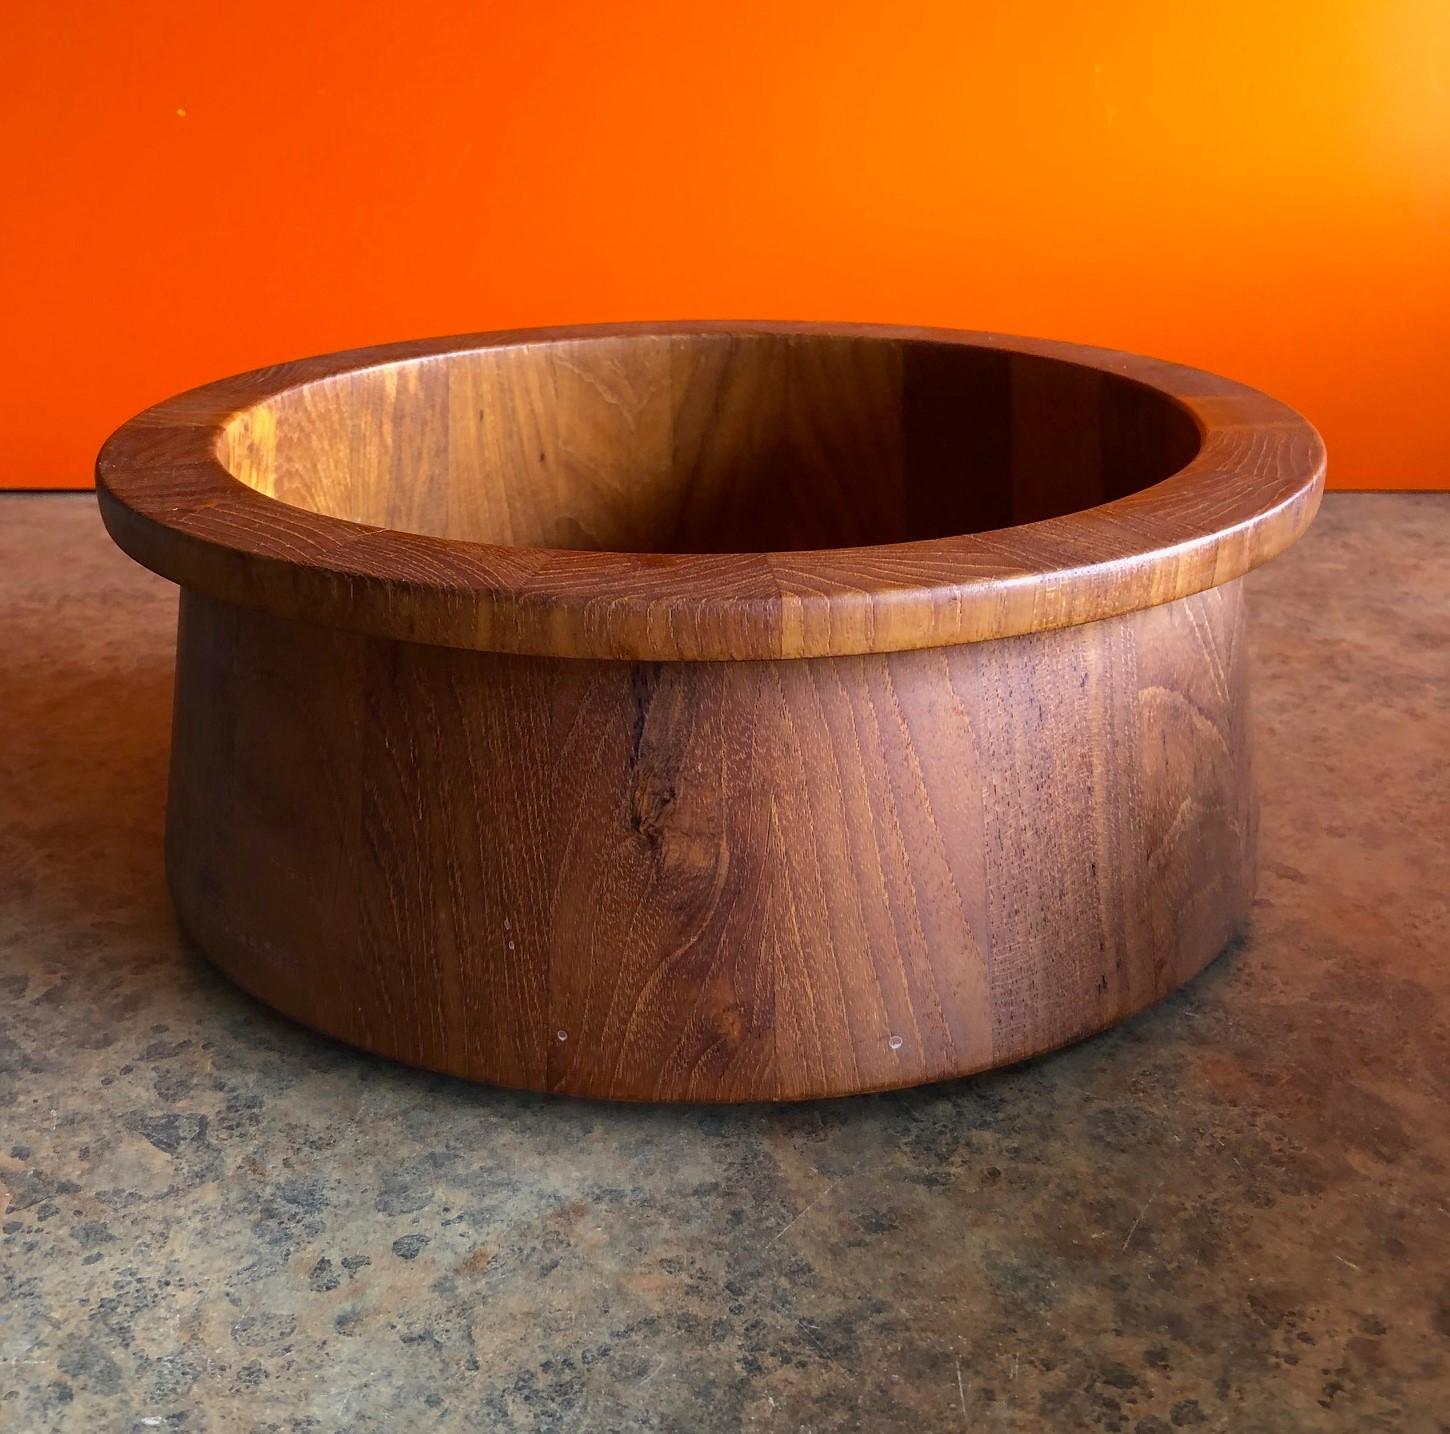 A very nice Danish modern staved teak bowl by Jens Quistgaard for Dansk, circa 1970s. The bowl is 11.5